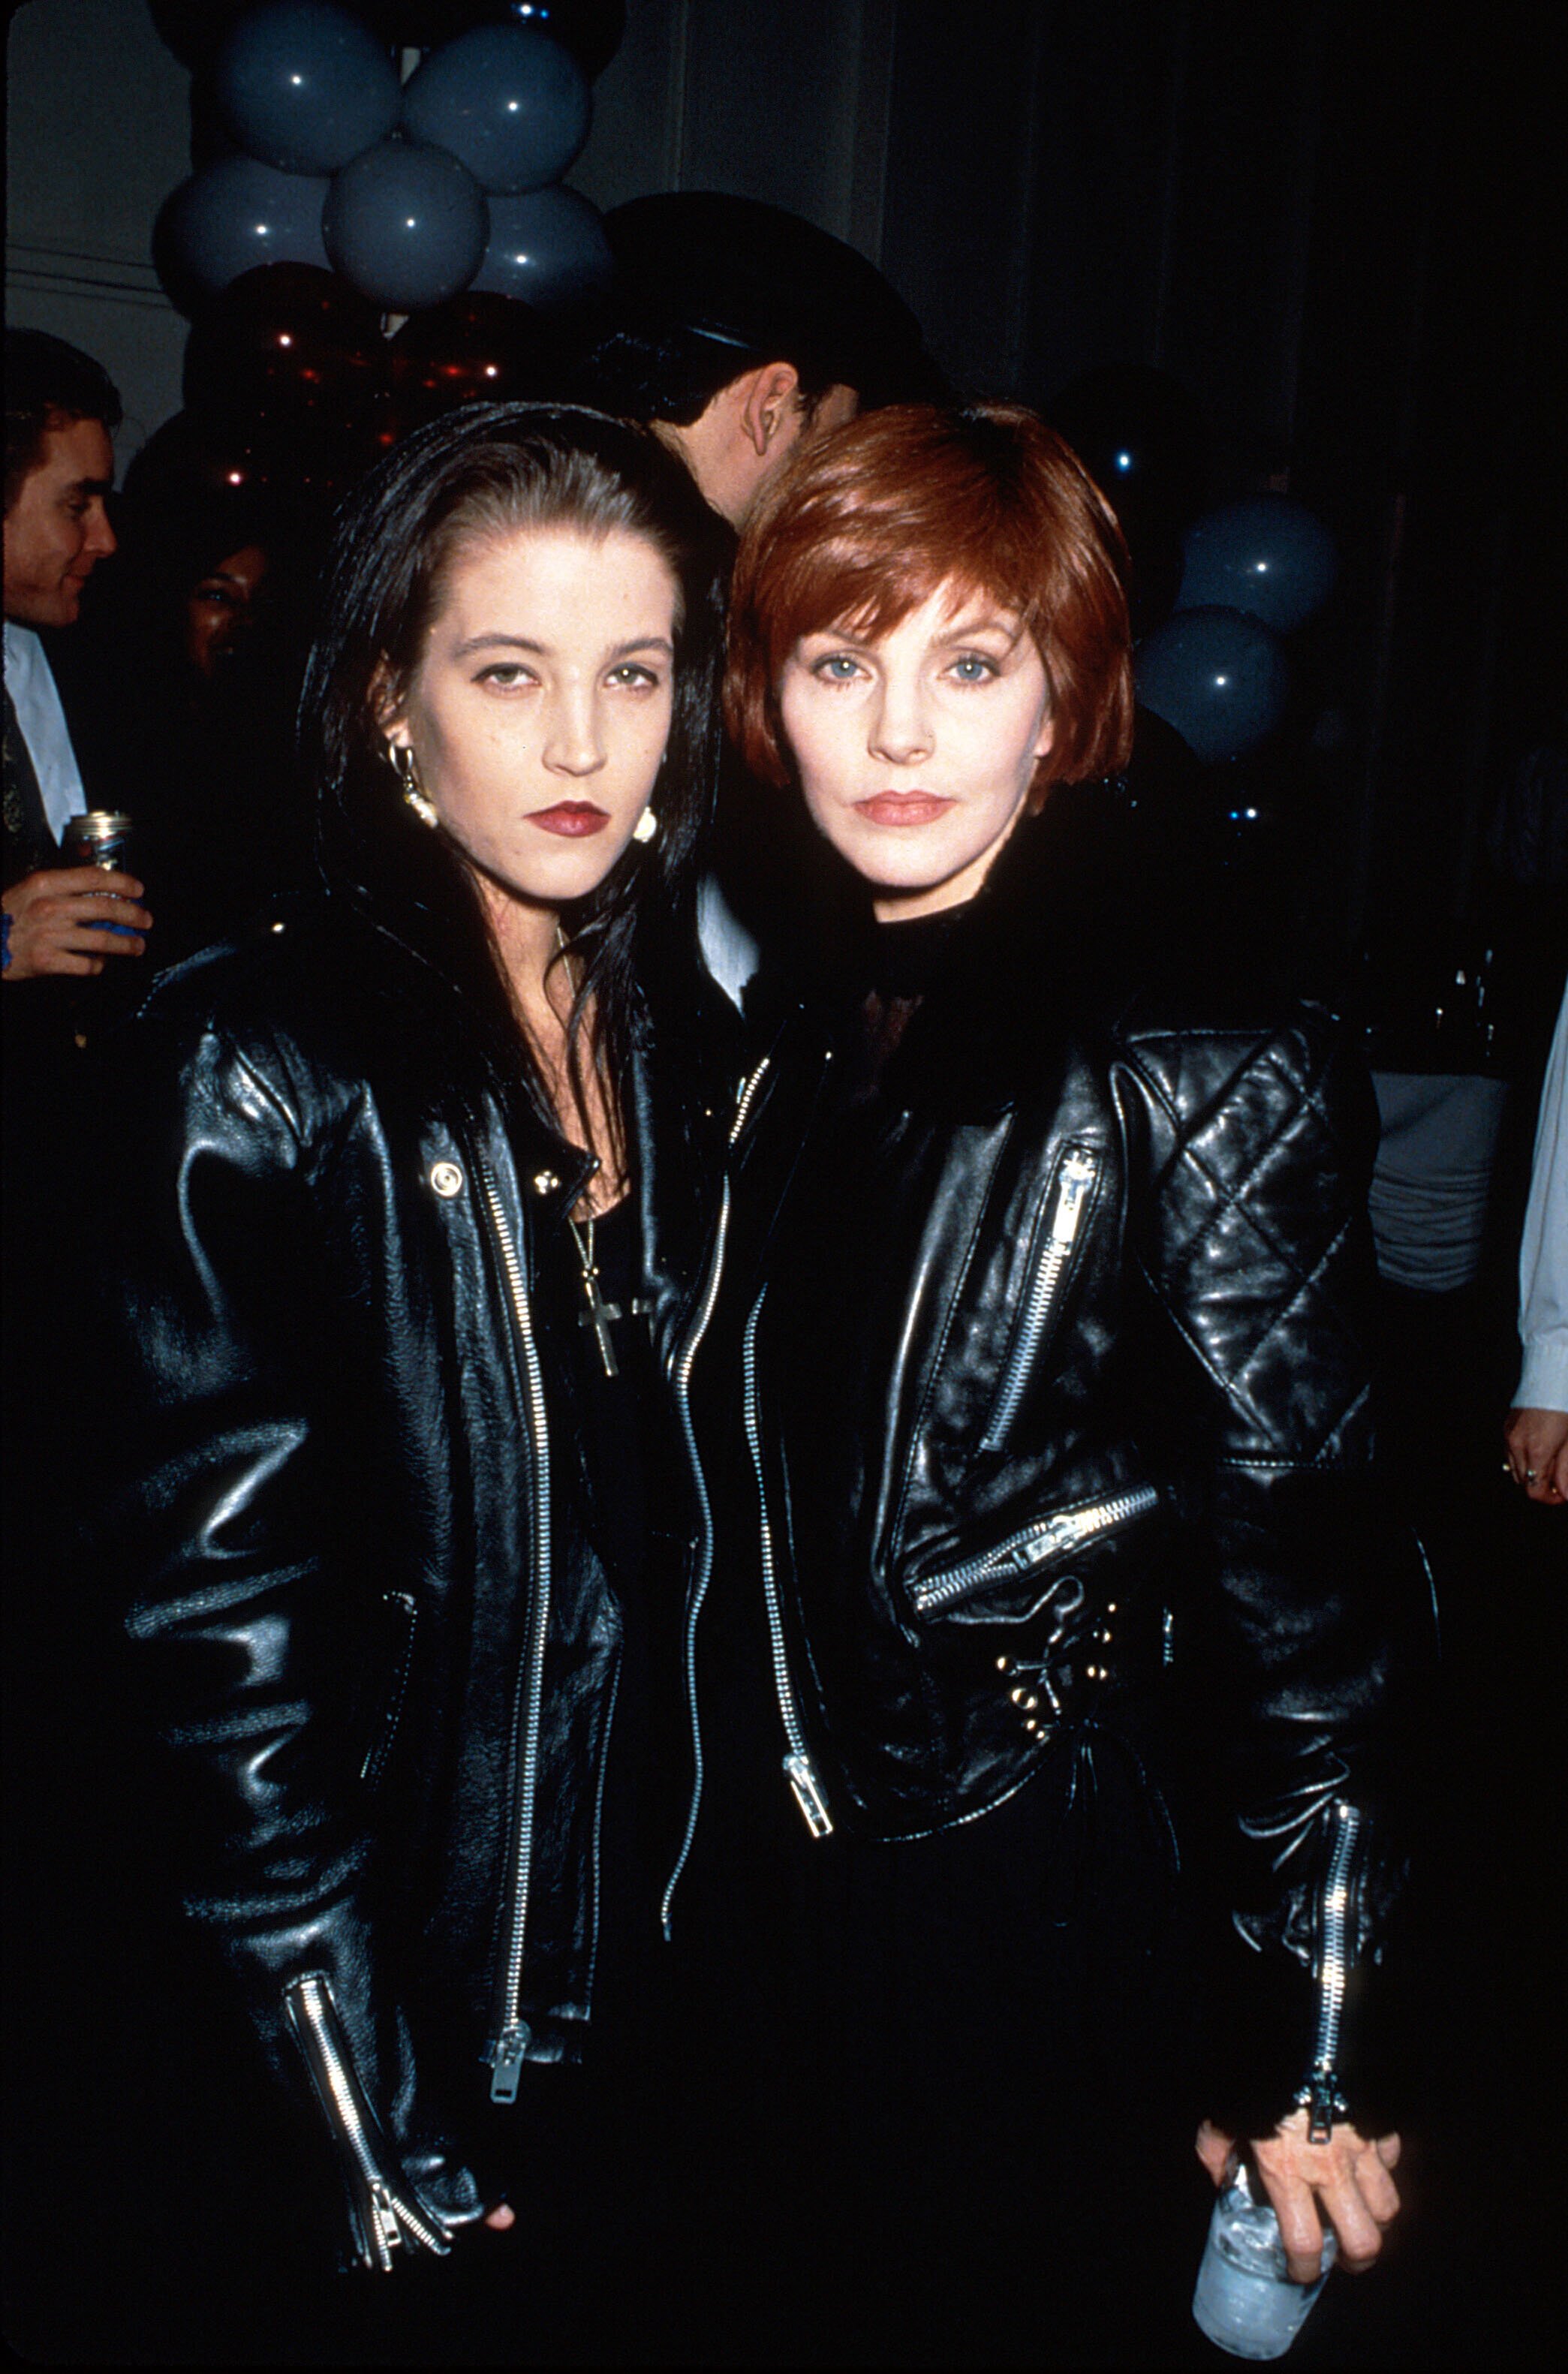 Lisa Marie Presley and mother, actress Priscilla Presley in 1994. | Source: Getty Images